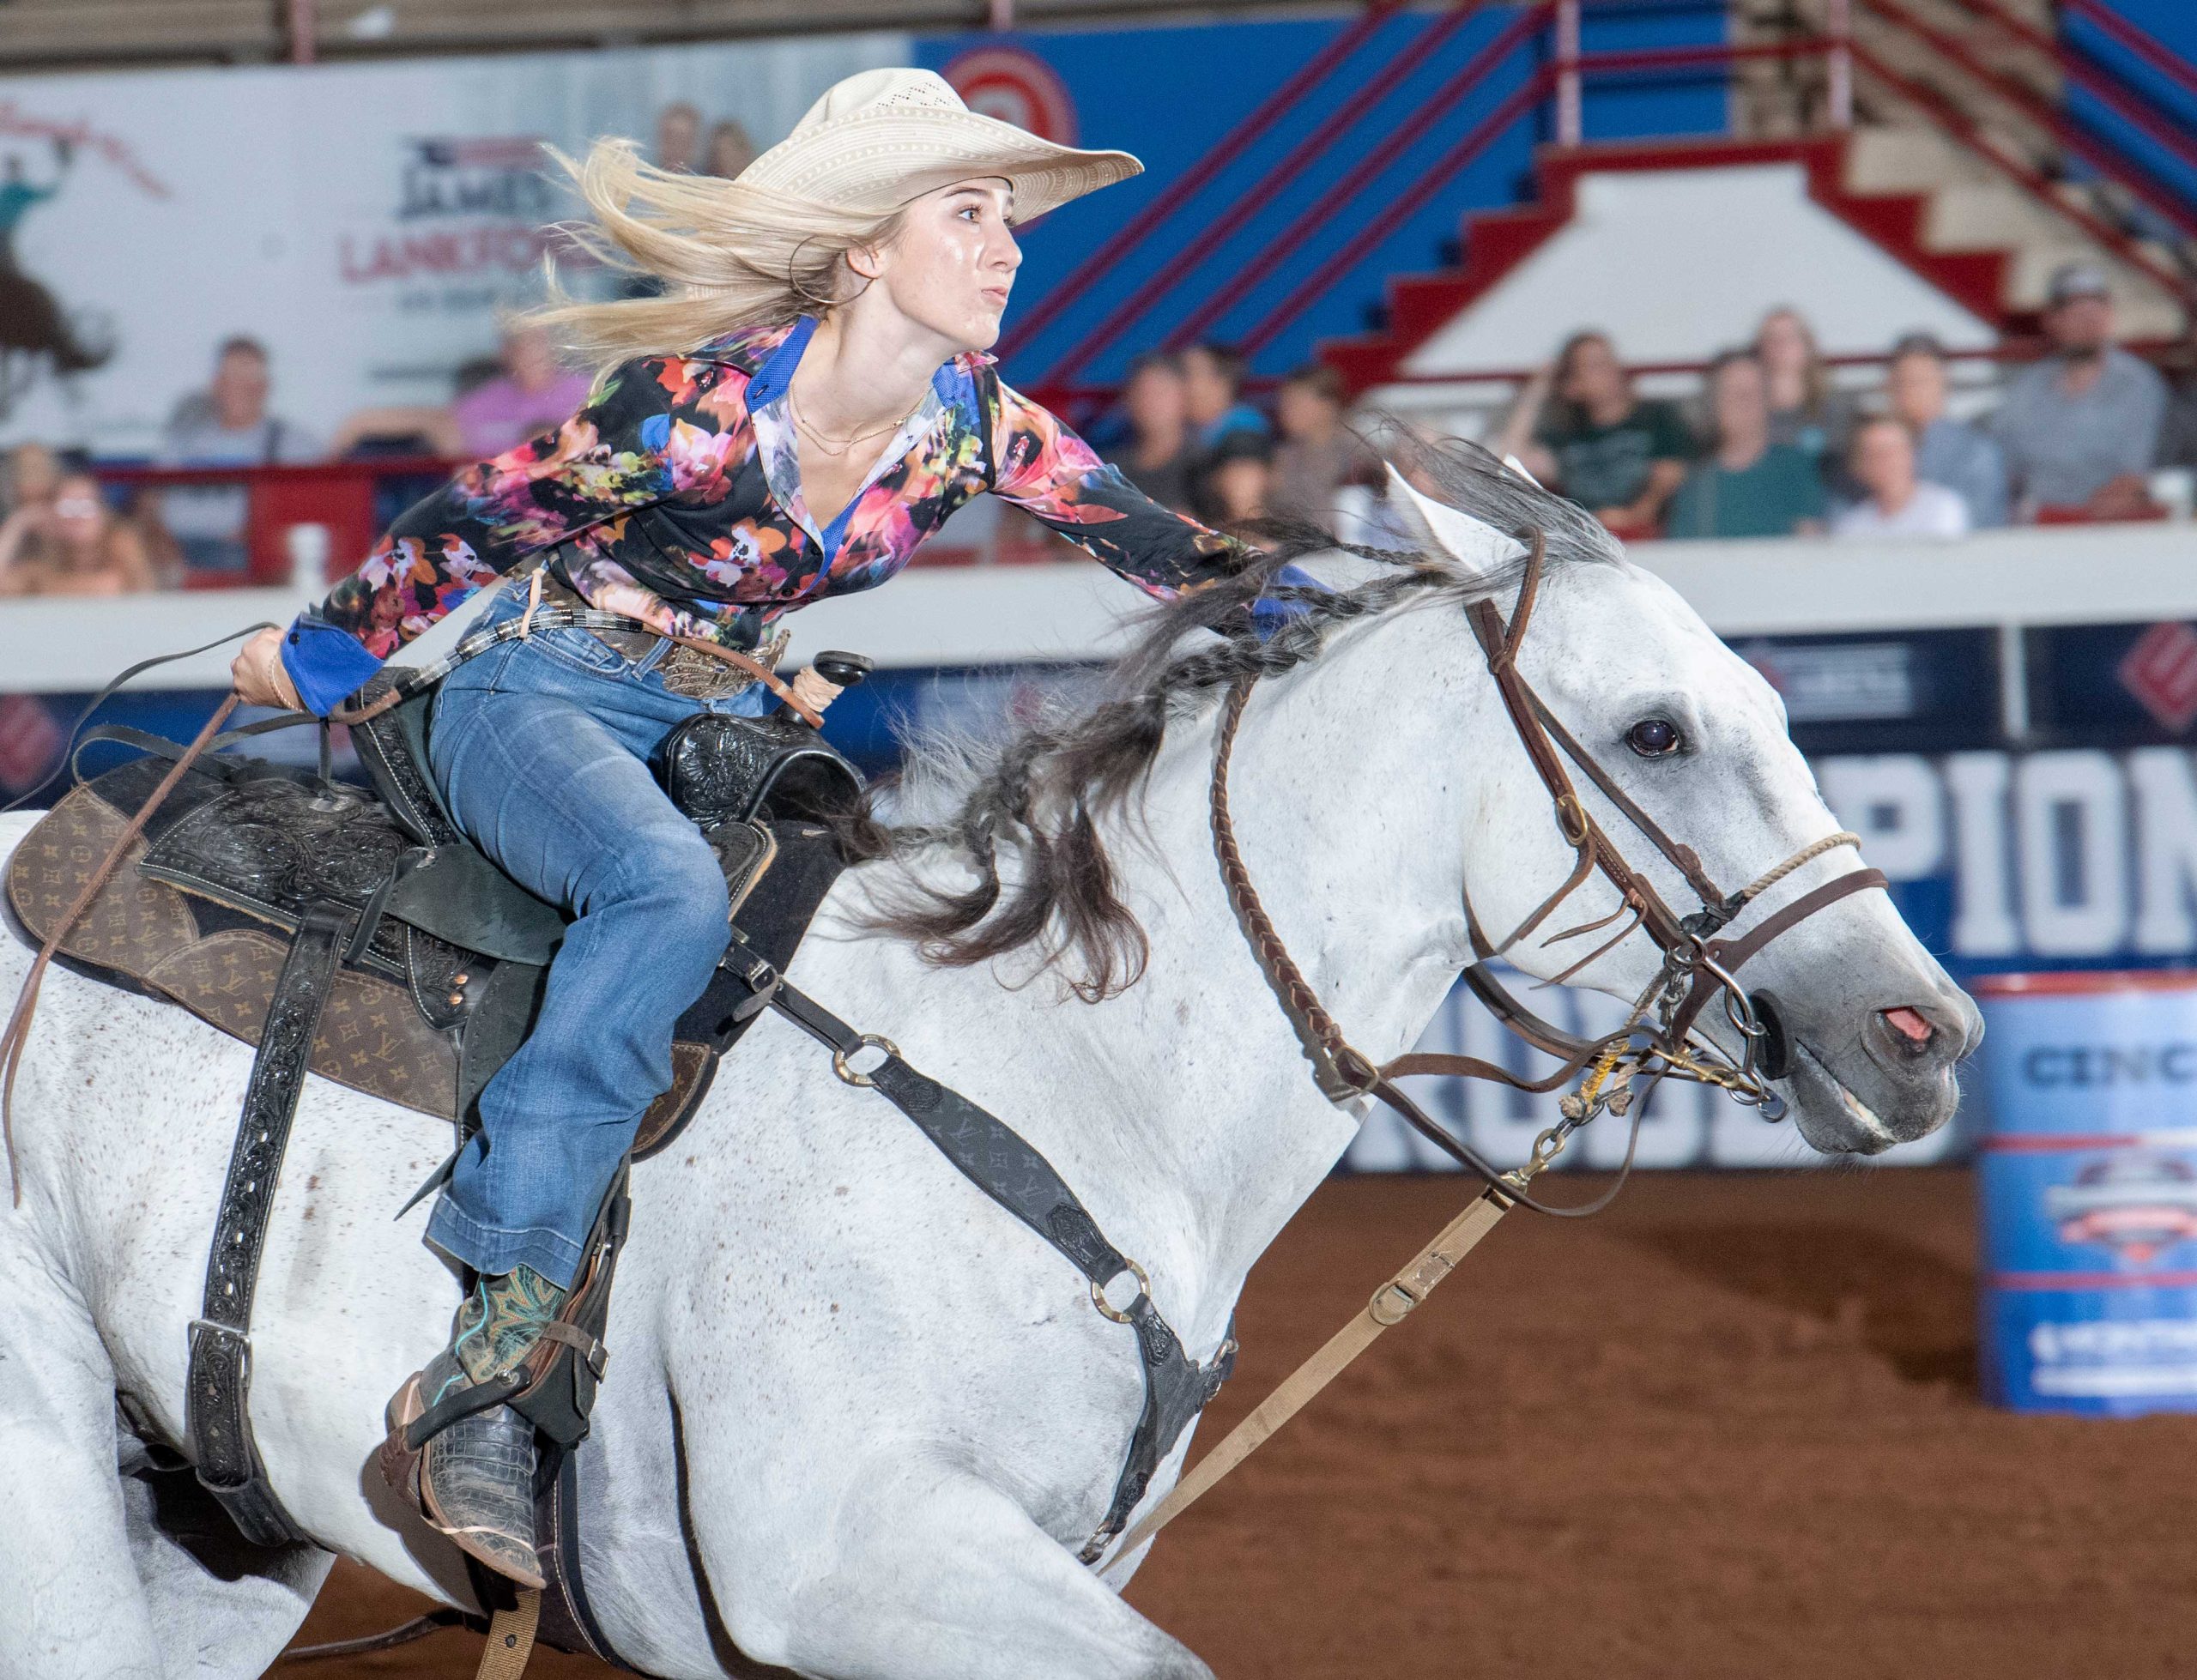 THE 2023 CINCH WORLD CHAMPIONSHIP JUNIOR RODEO SET TO BE ONE OF THE RICHEST YOUTH RODEOS IN HISTORY